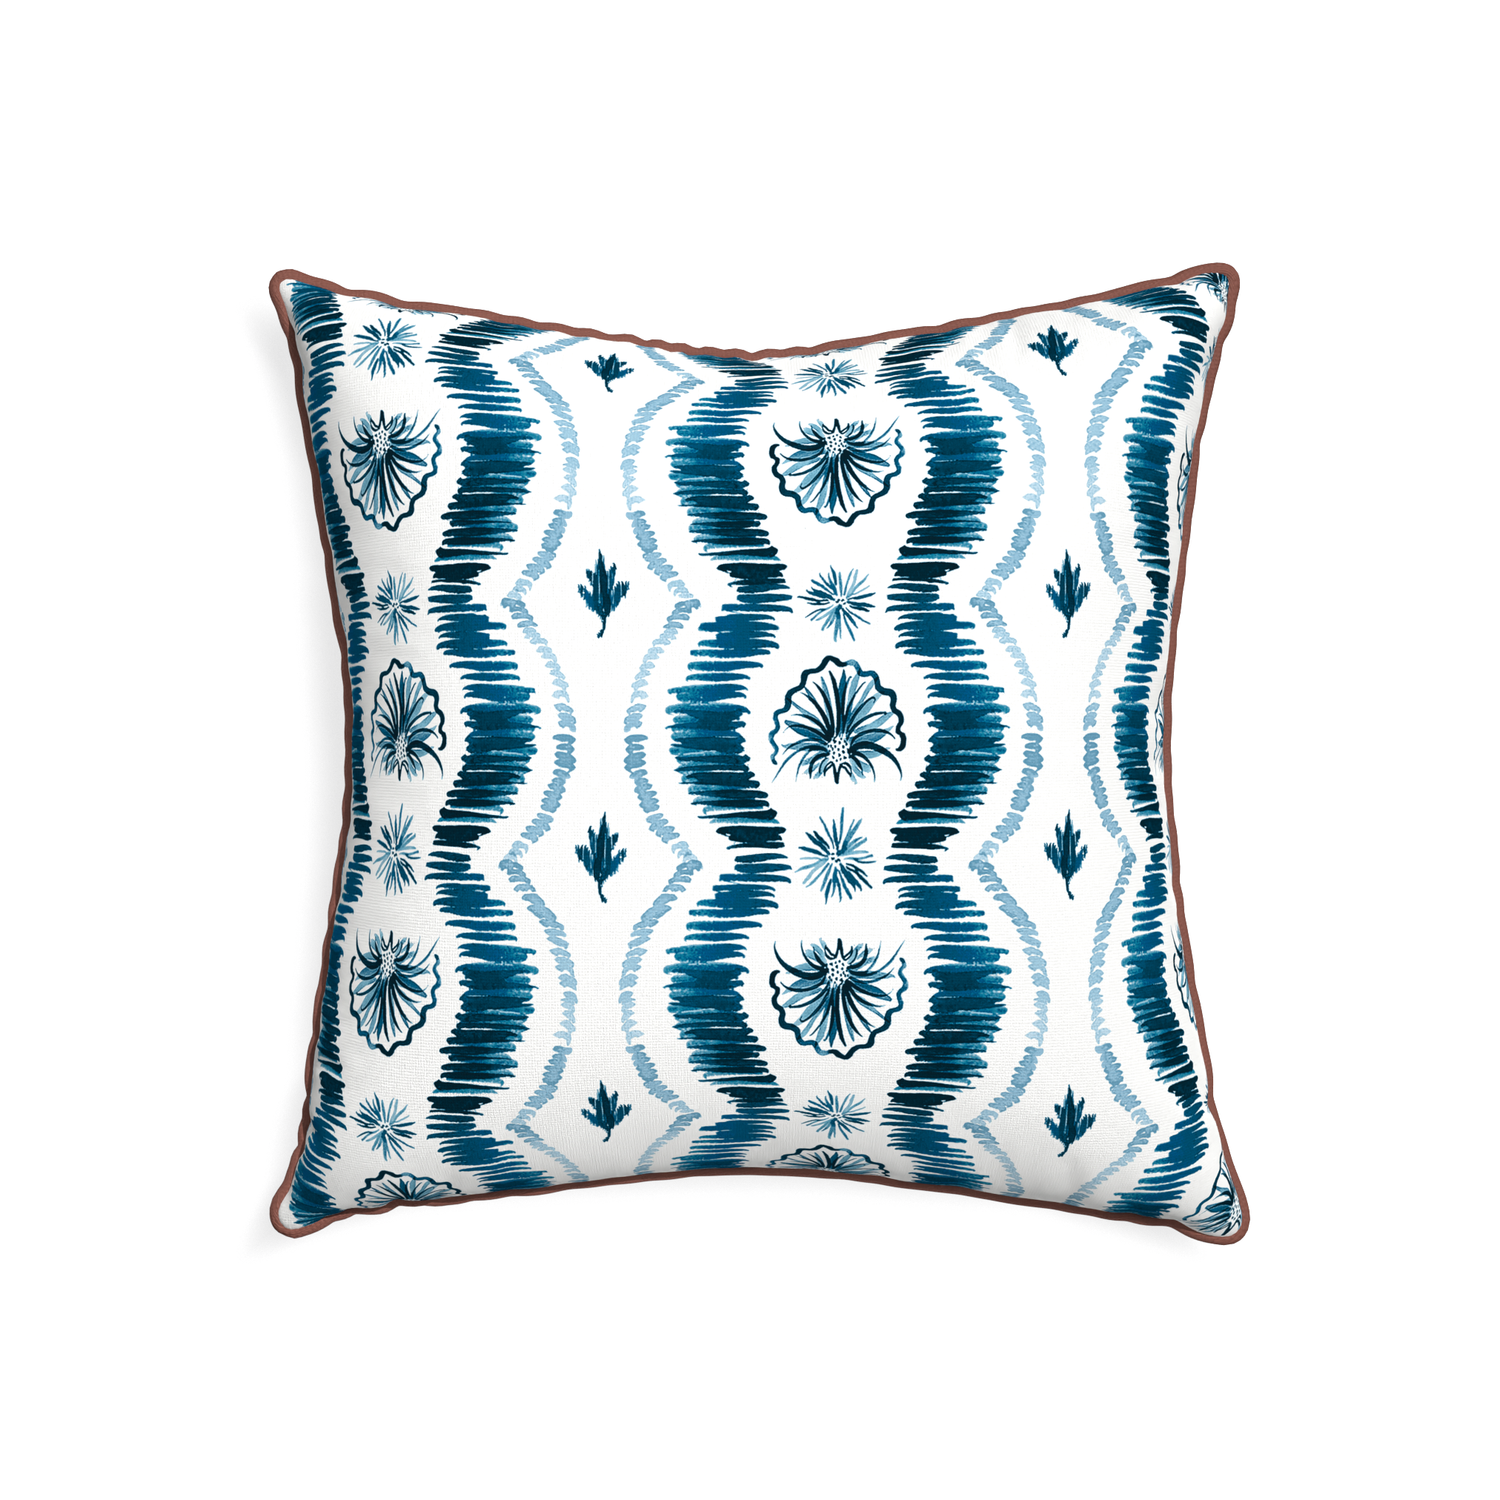 22-square alice custom blue ikatpillow with w piping on white background